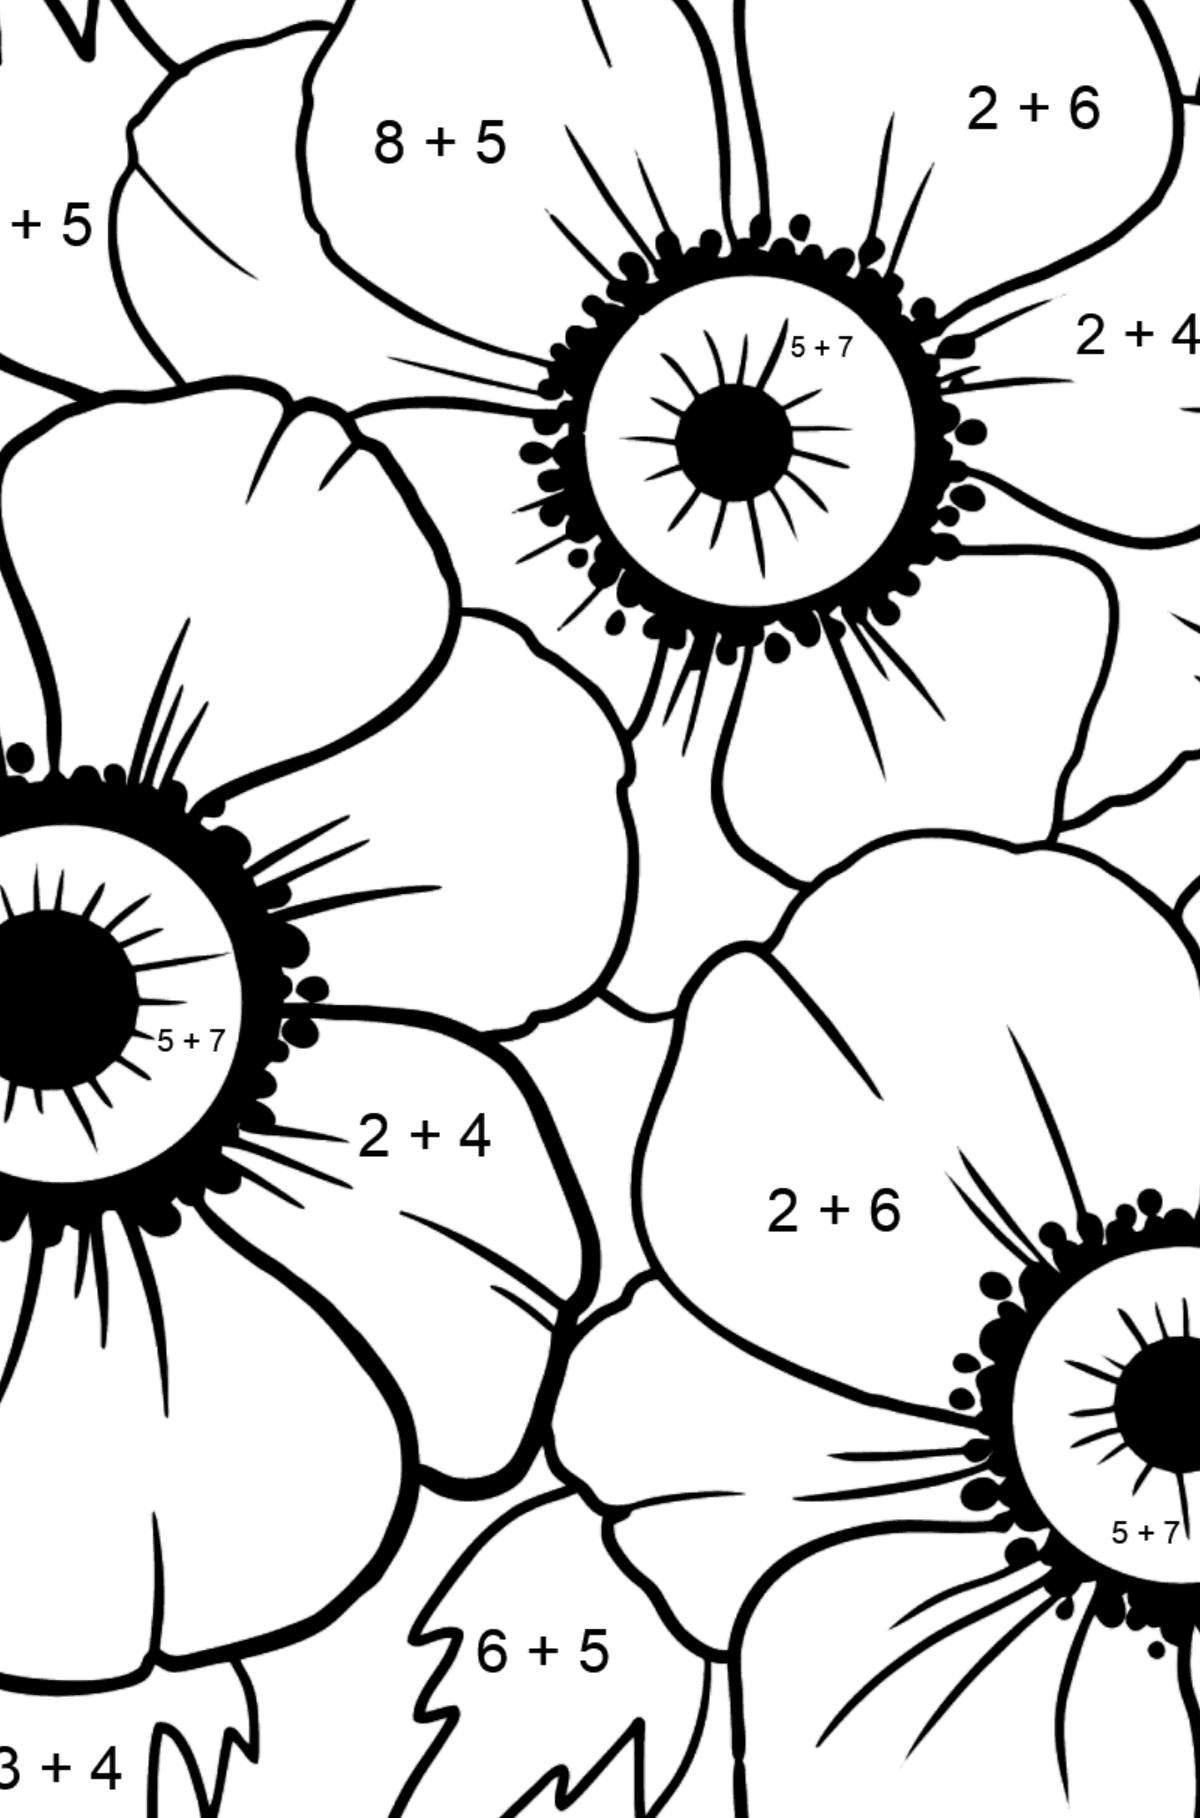 Coloring Page Anemone Mr. Fokker - Math Coloring - Addition for Kids